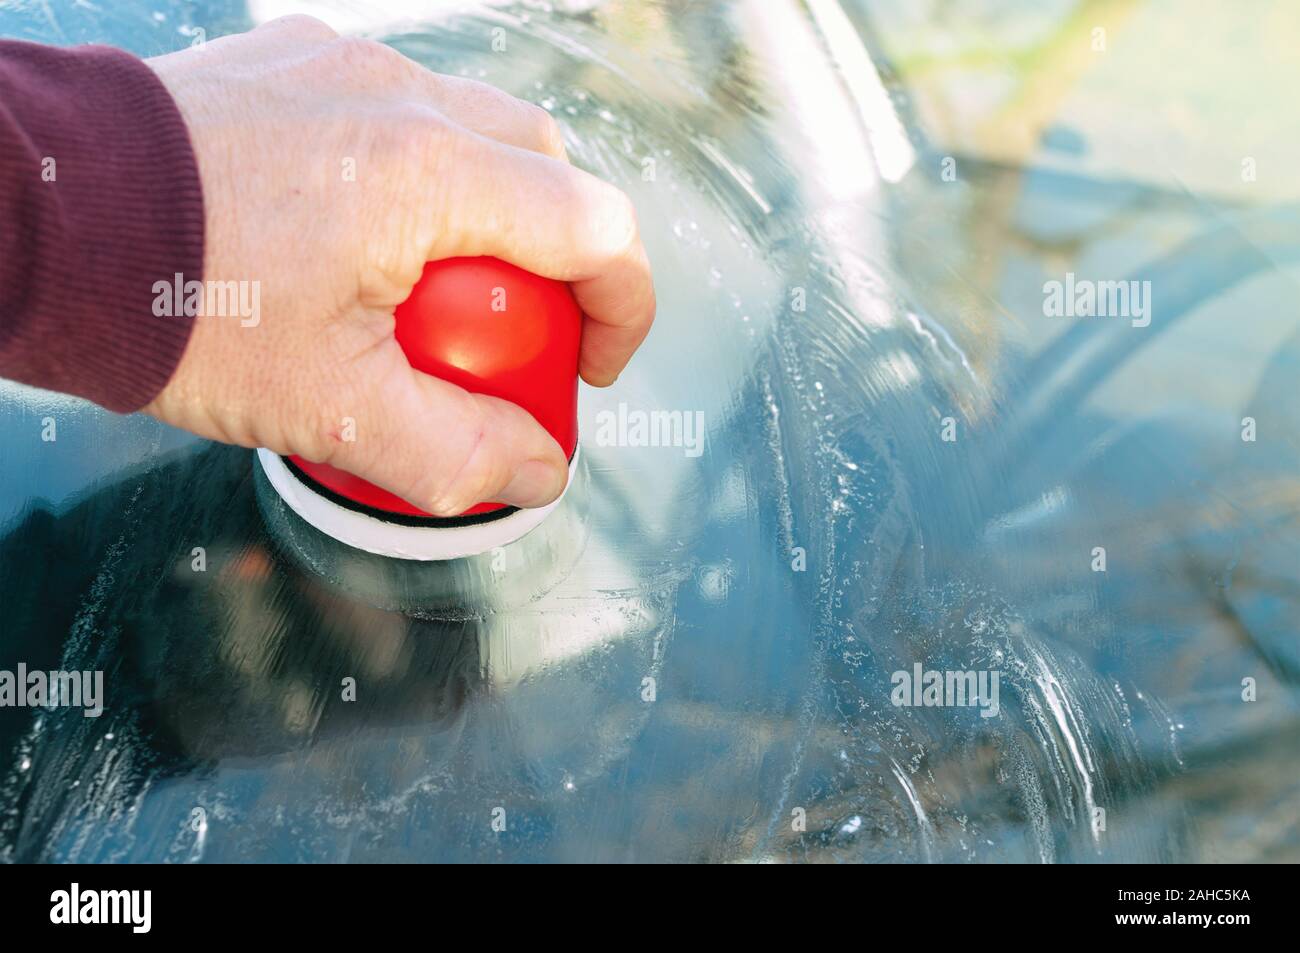 Car windshield polish against scratches Stock Photo